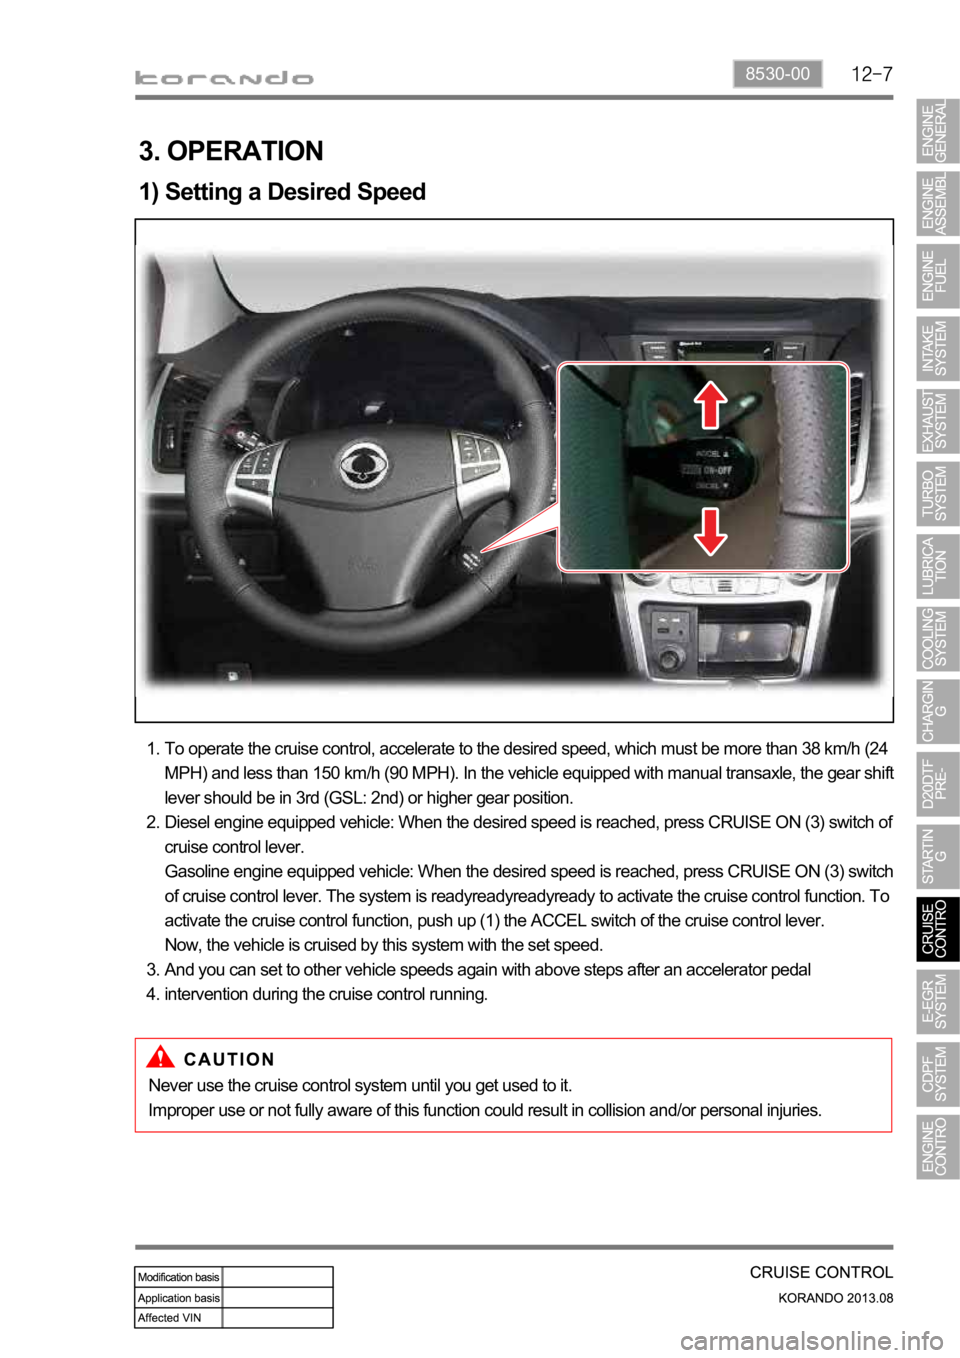 SSANGYONG KORANDO 2013  Service Manual 8530-00
3. OPERATION
1) Setting a Desired Speed
To operate the cruise control, accelerate to the desired speed, which must be more than 38 km/h (24 
MPH) and less than 150 km/h (90 MPH). In the vehicl